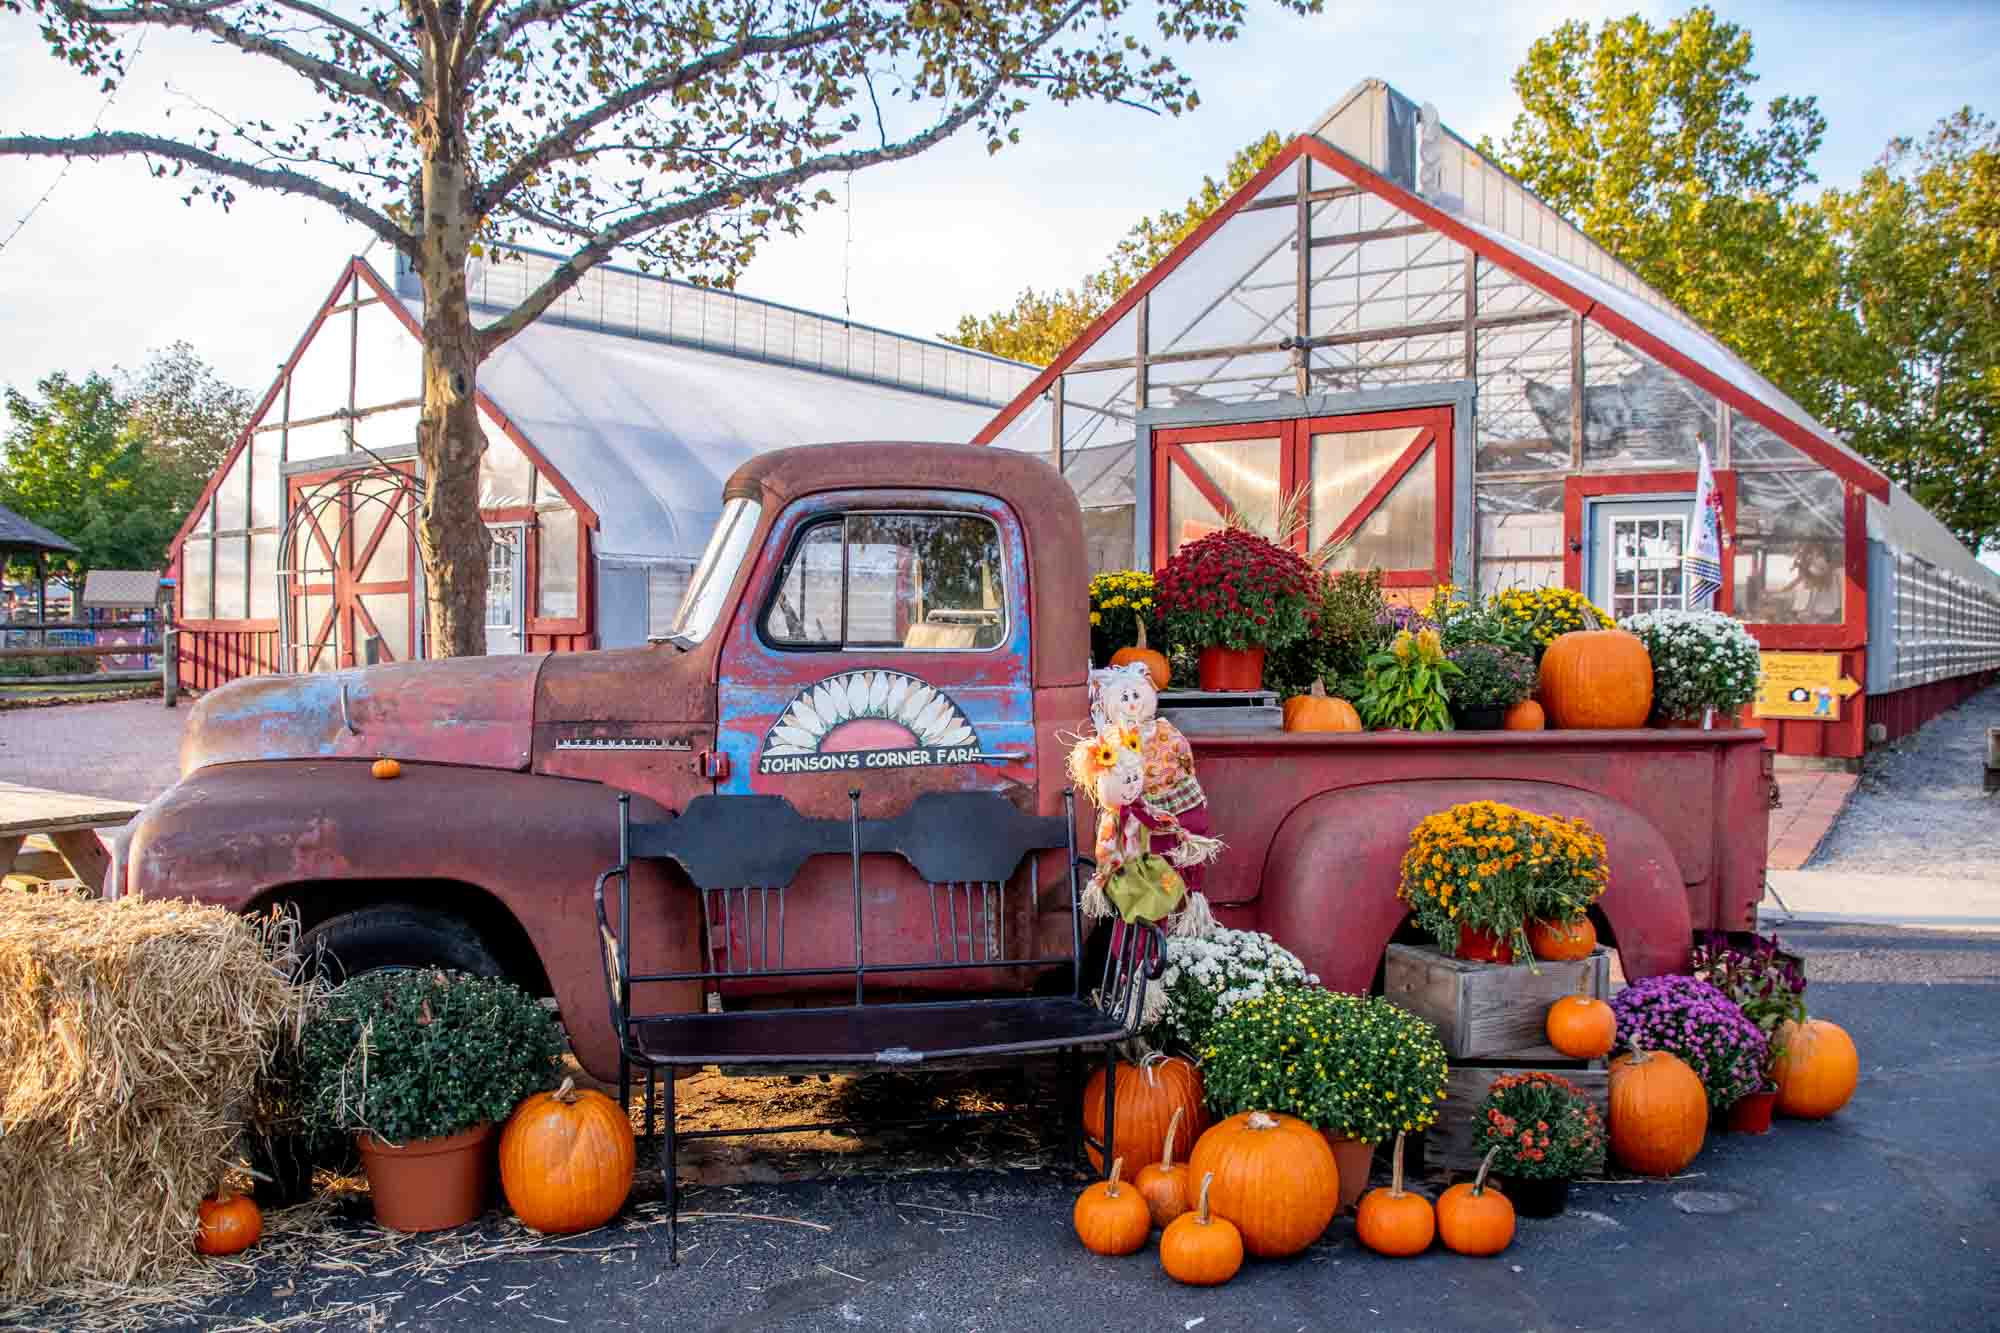 Pumpkins, mums, and hay bales displayed on an old red pickup truck with a sign for "Johnson's Corner Farm"